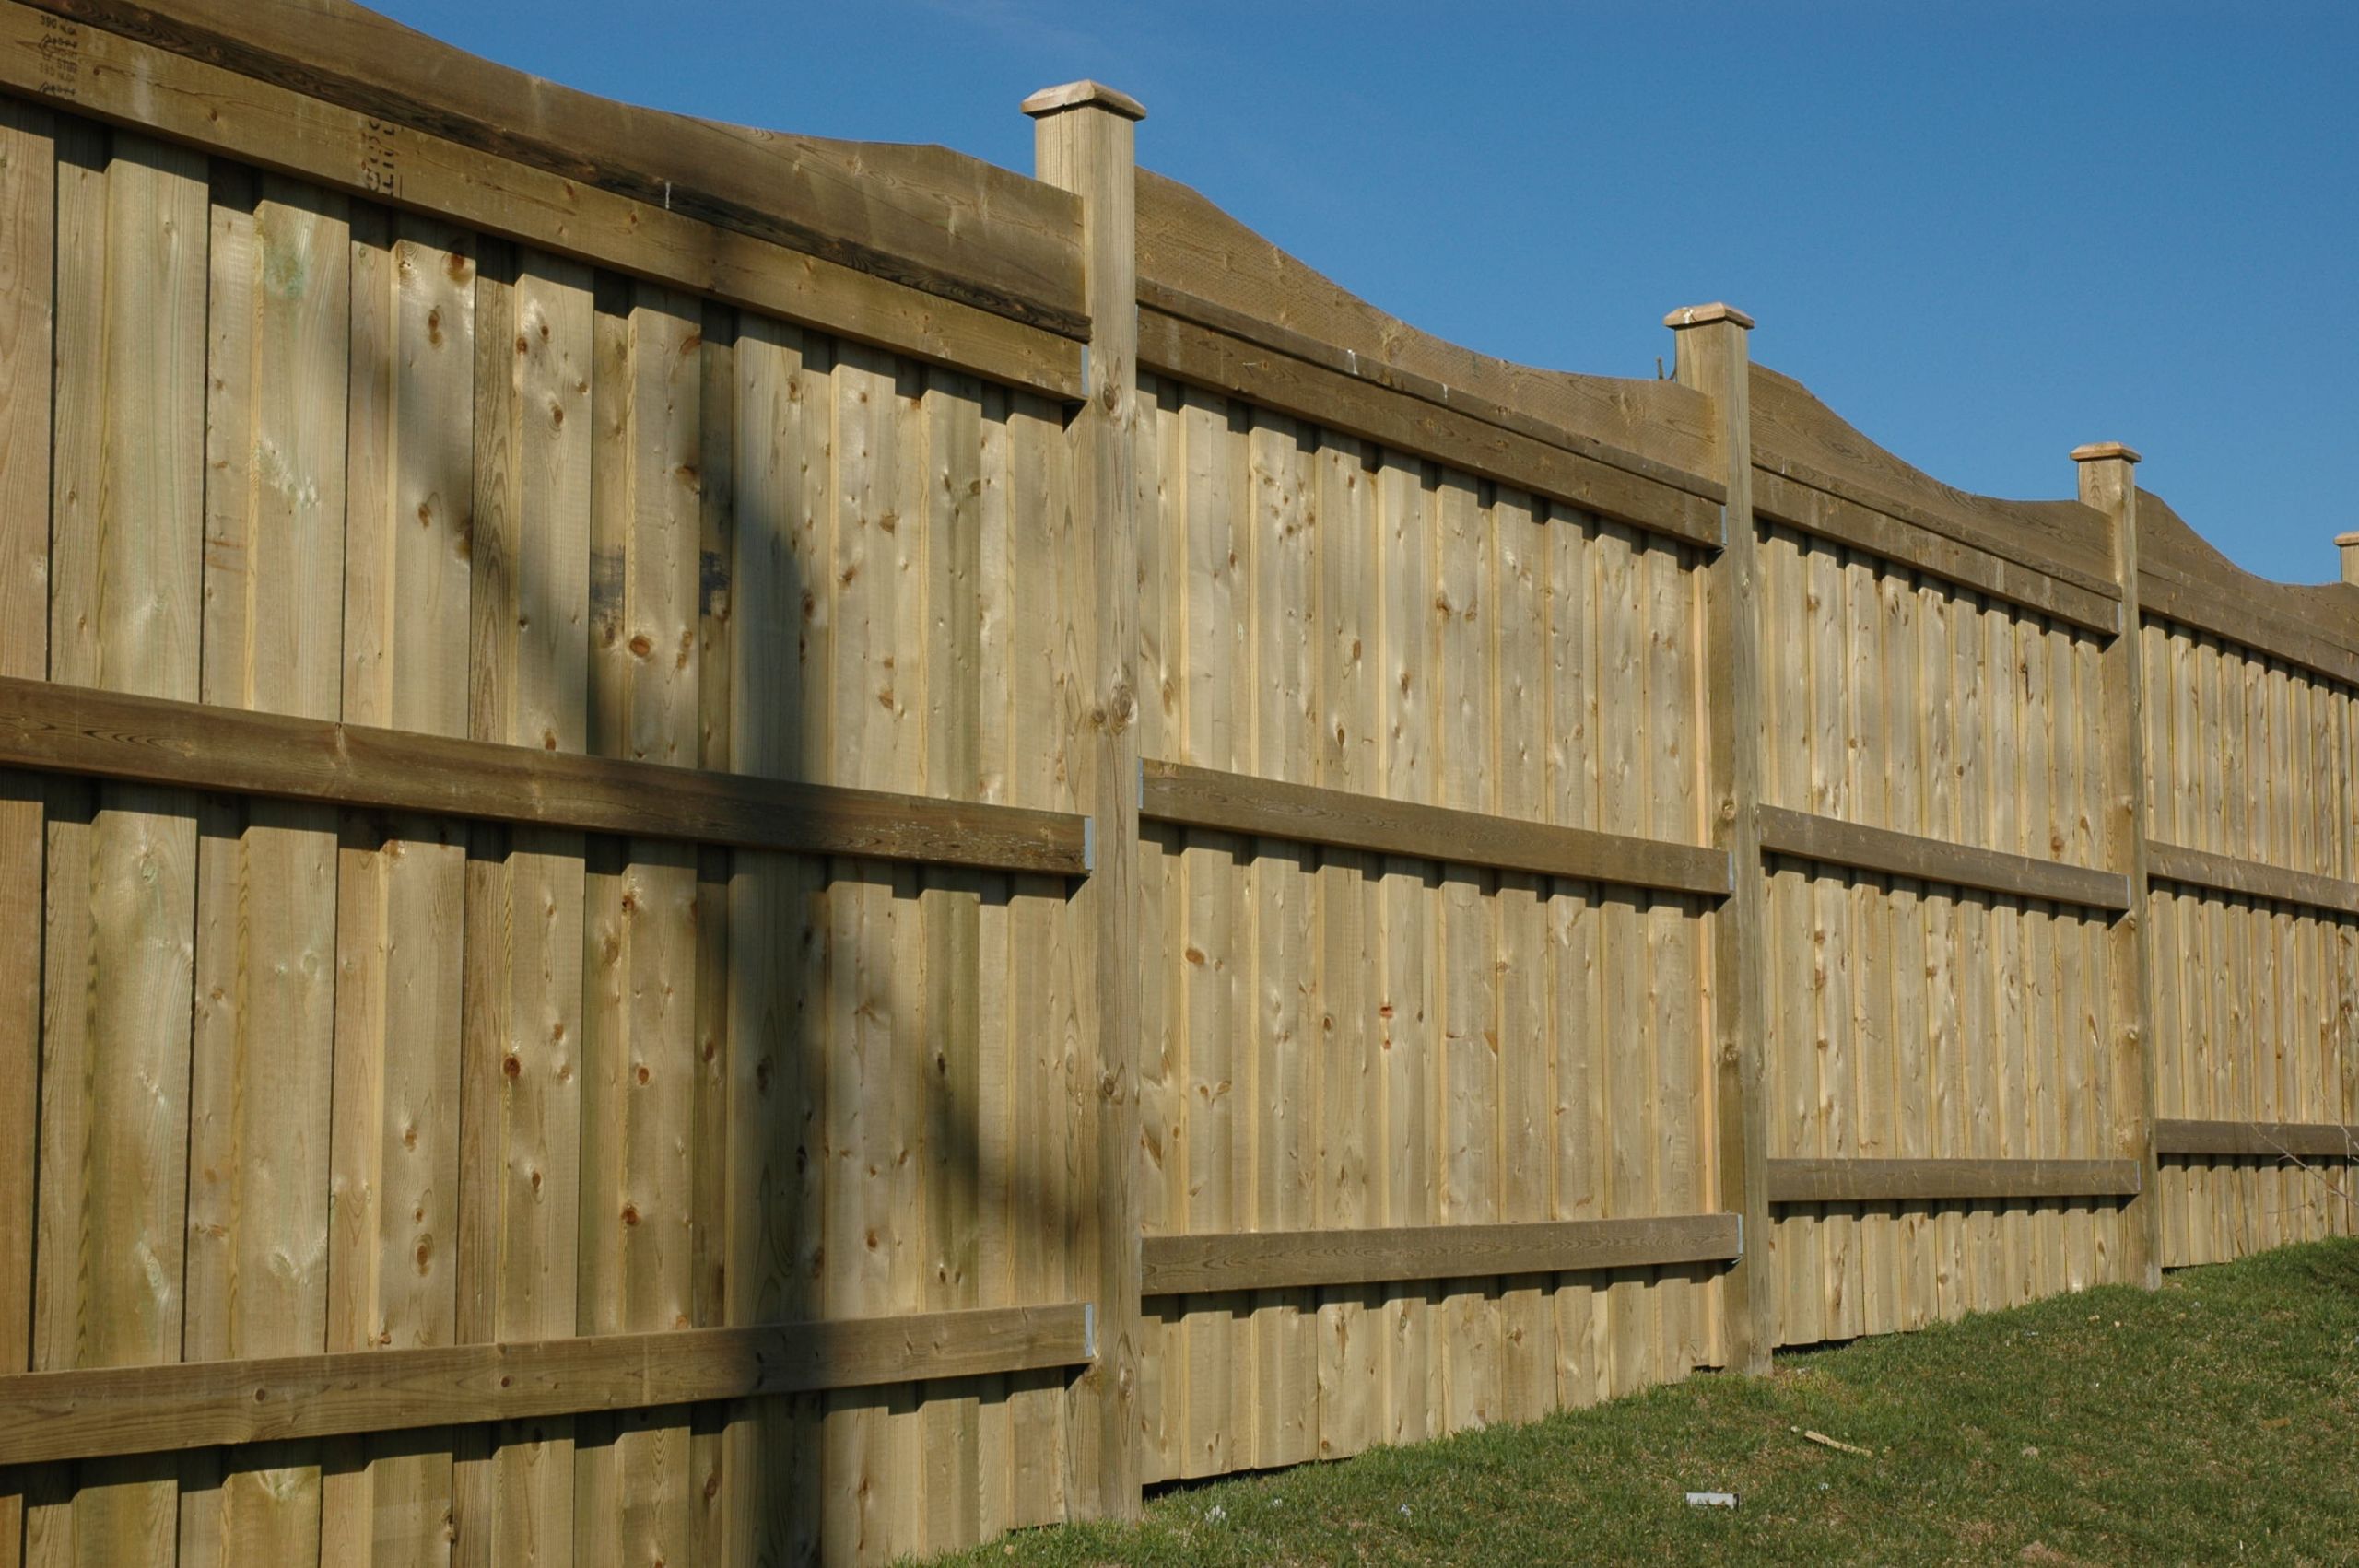 DIY Fence Plans
 PDF How To Build A 6 Foot Wood Privacy Fence Plans DIY